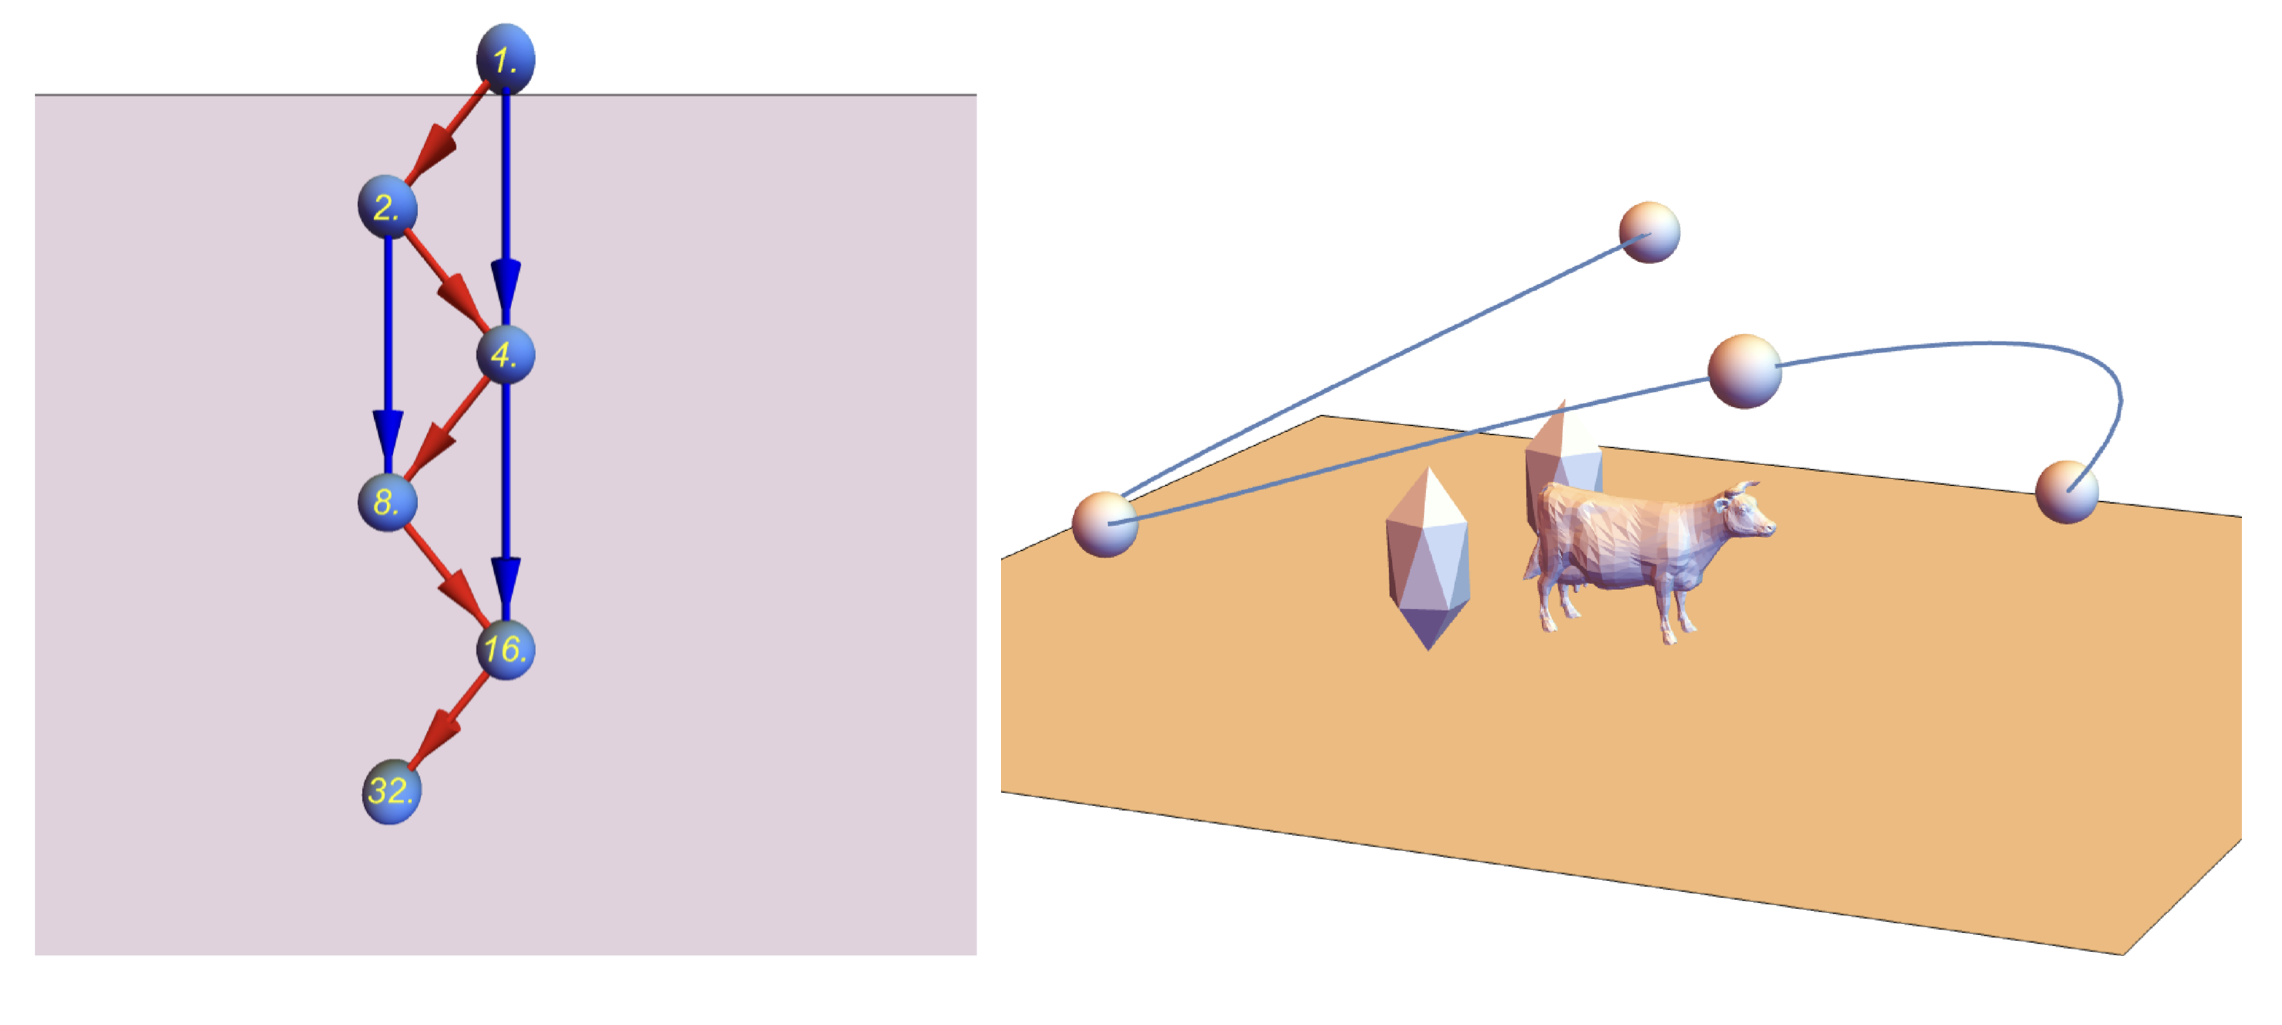 Left: Static frame of multiway system animation. Right: Depiction of scene and keyframe interpolated camera motion path